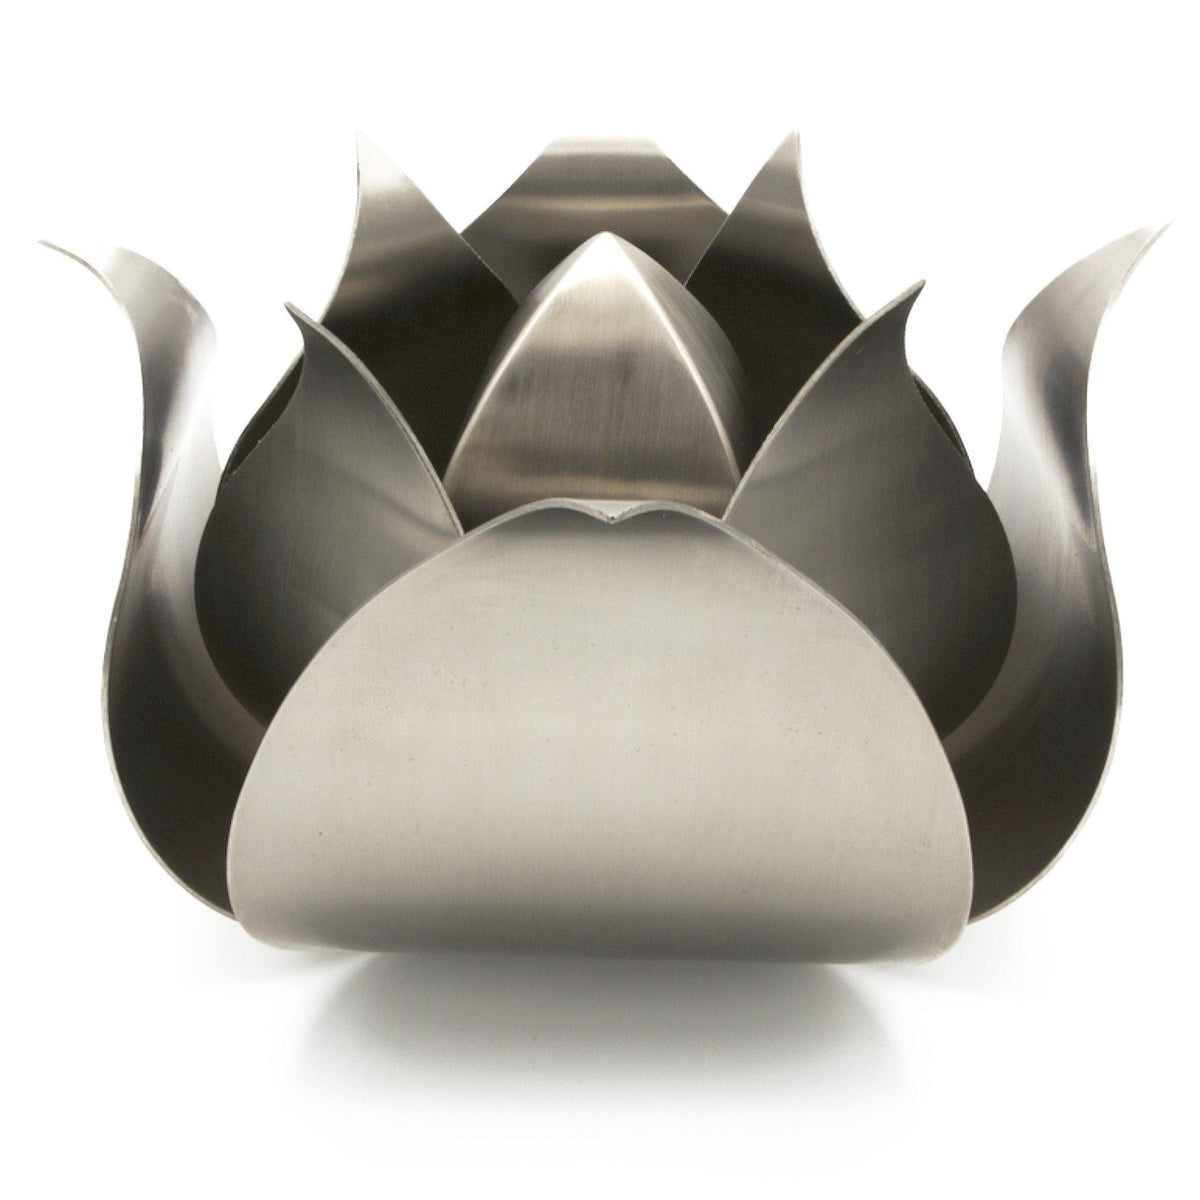 Bourne Rose Large Stainless Steel Cremation Ashes Urn TOW